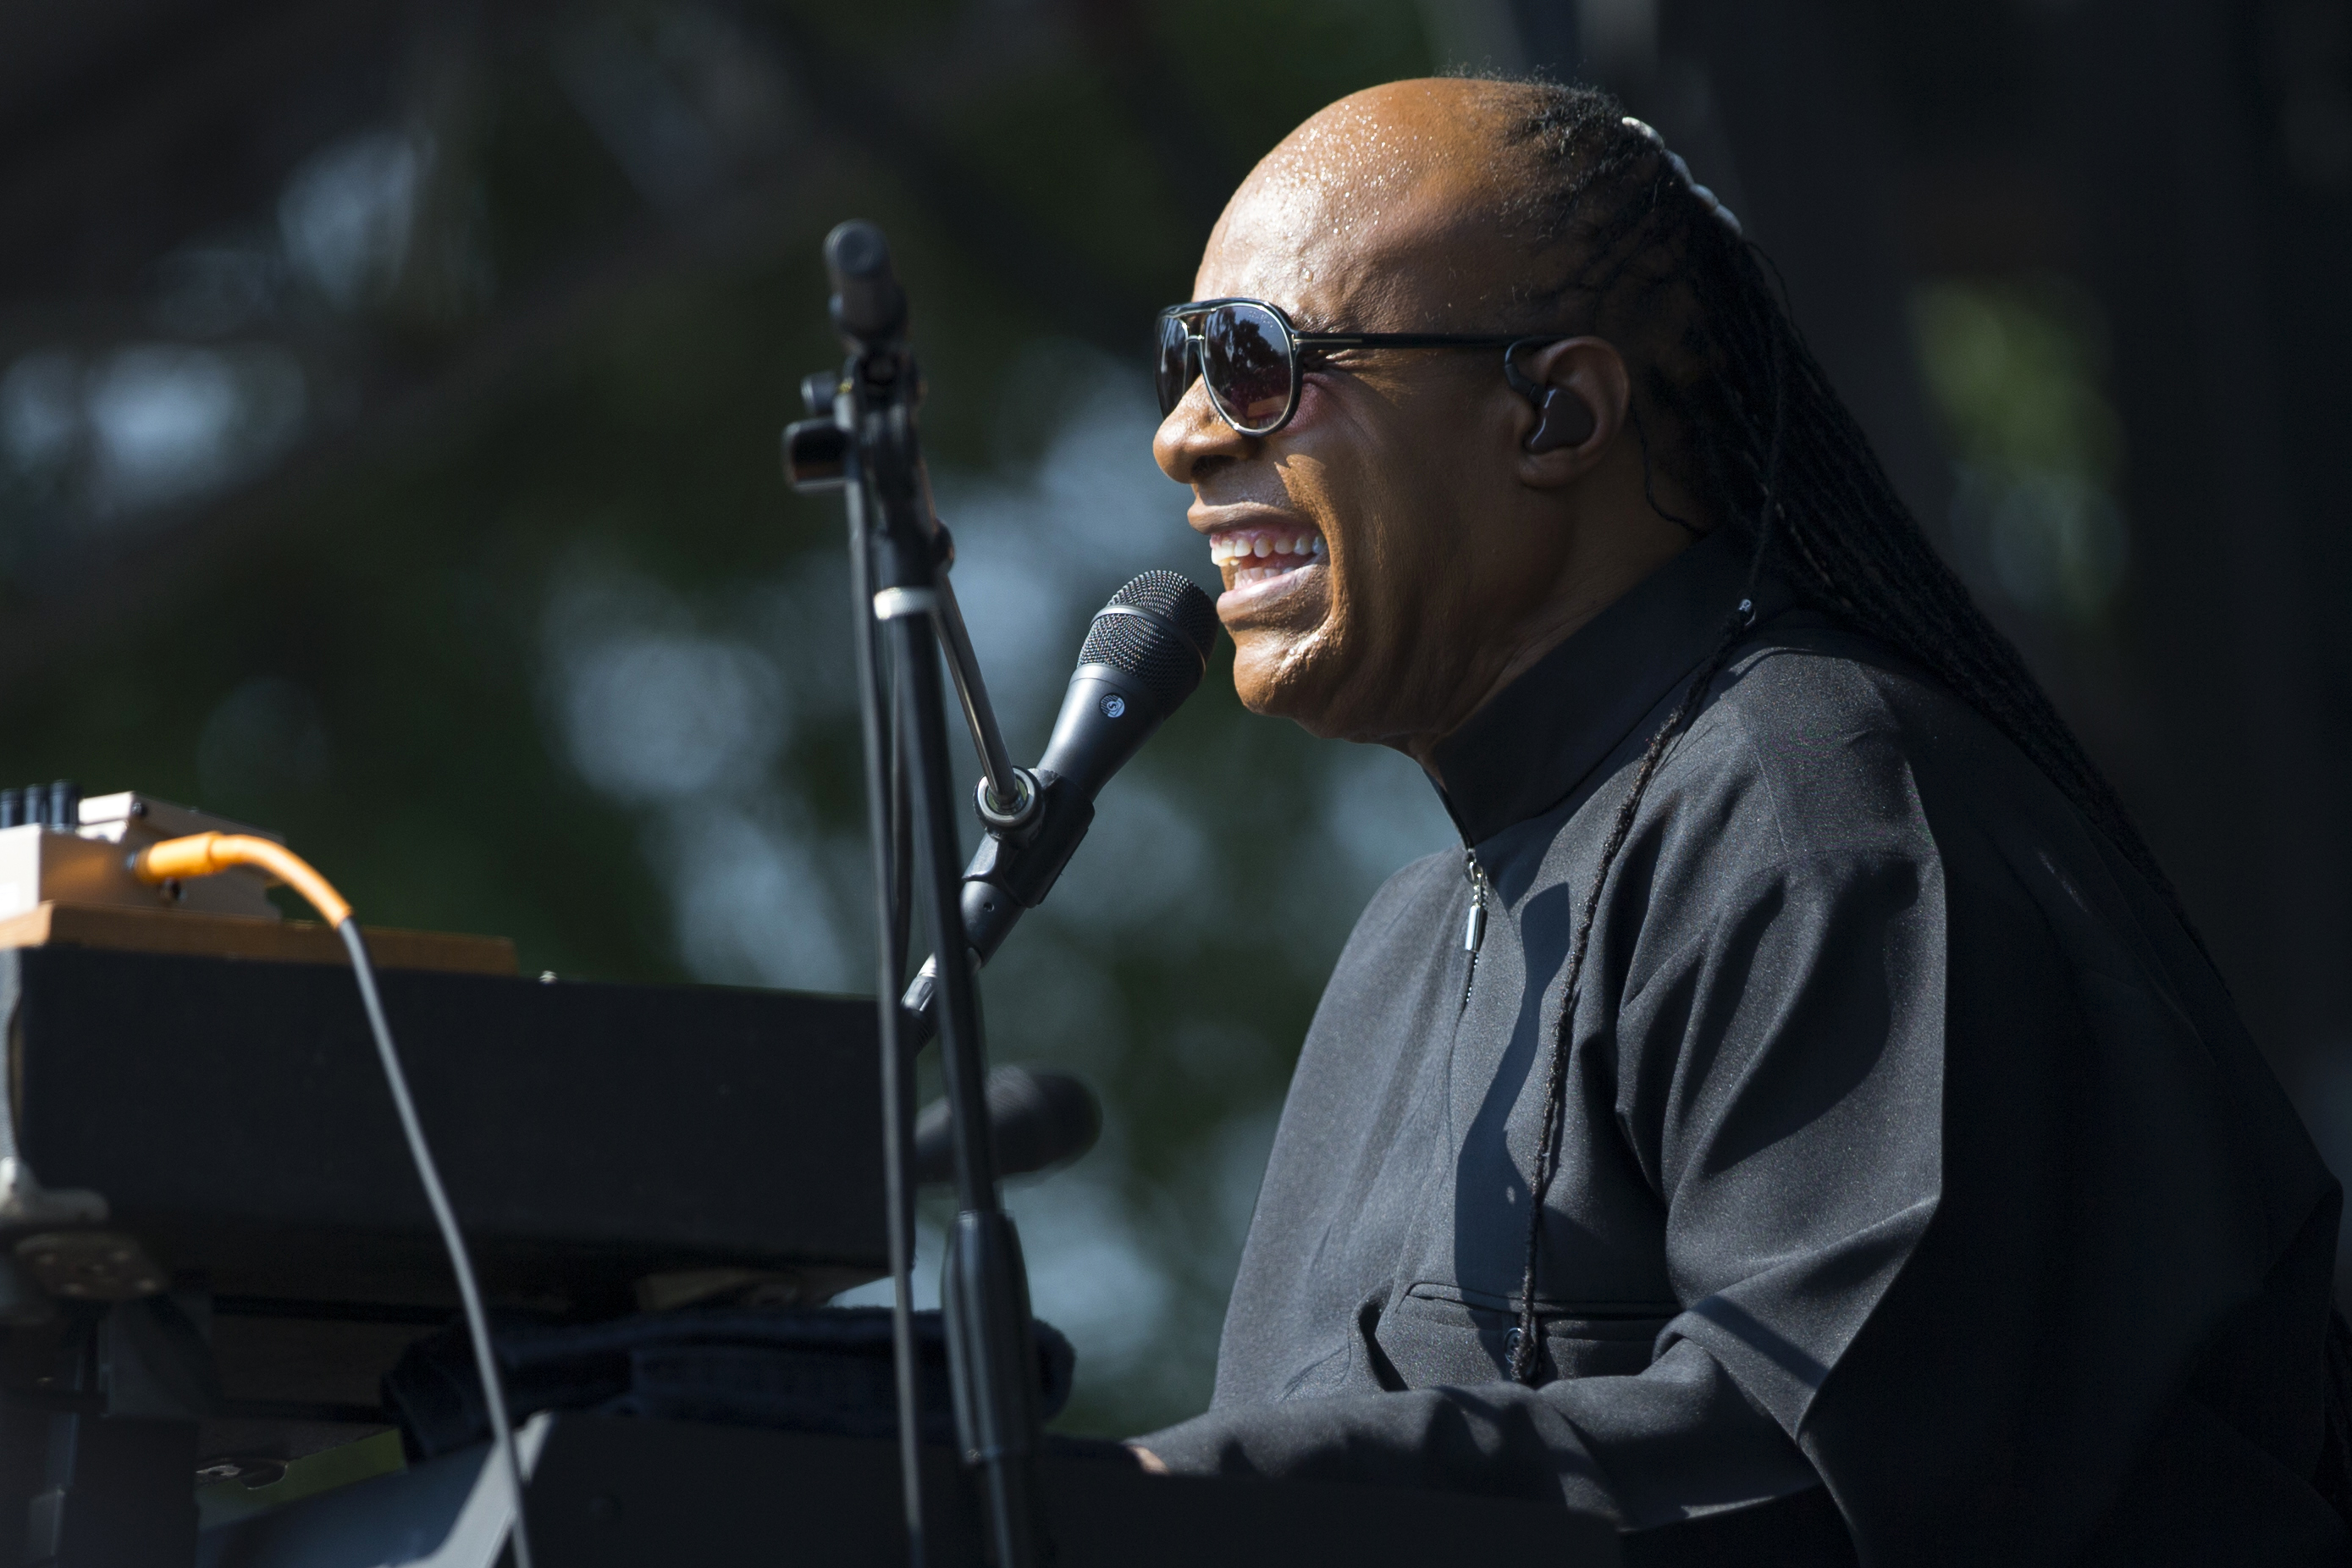 Stevie Wonder plays for free in D.C. (Photos/Video)